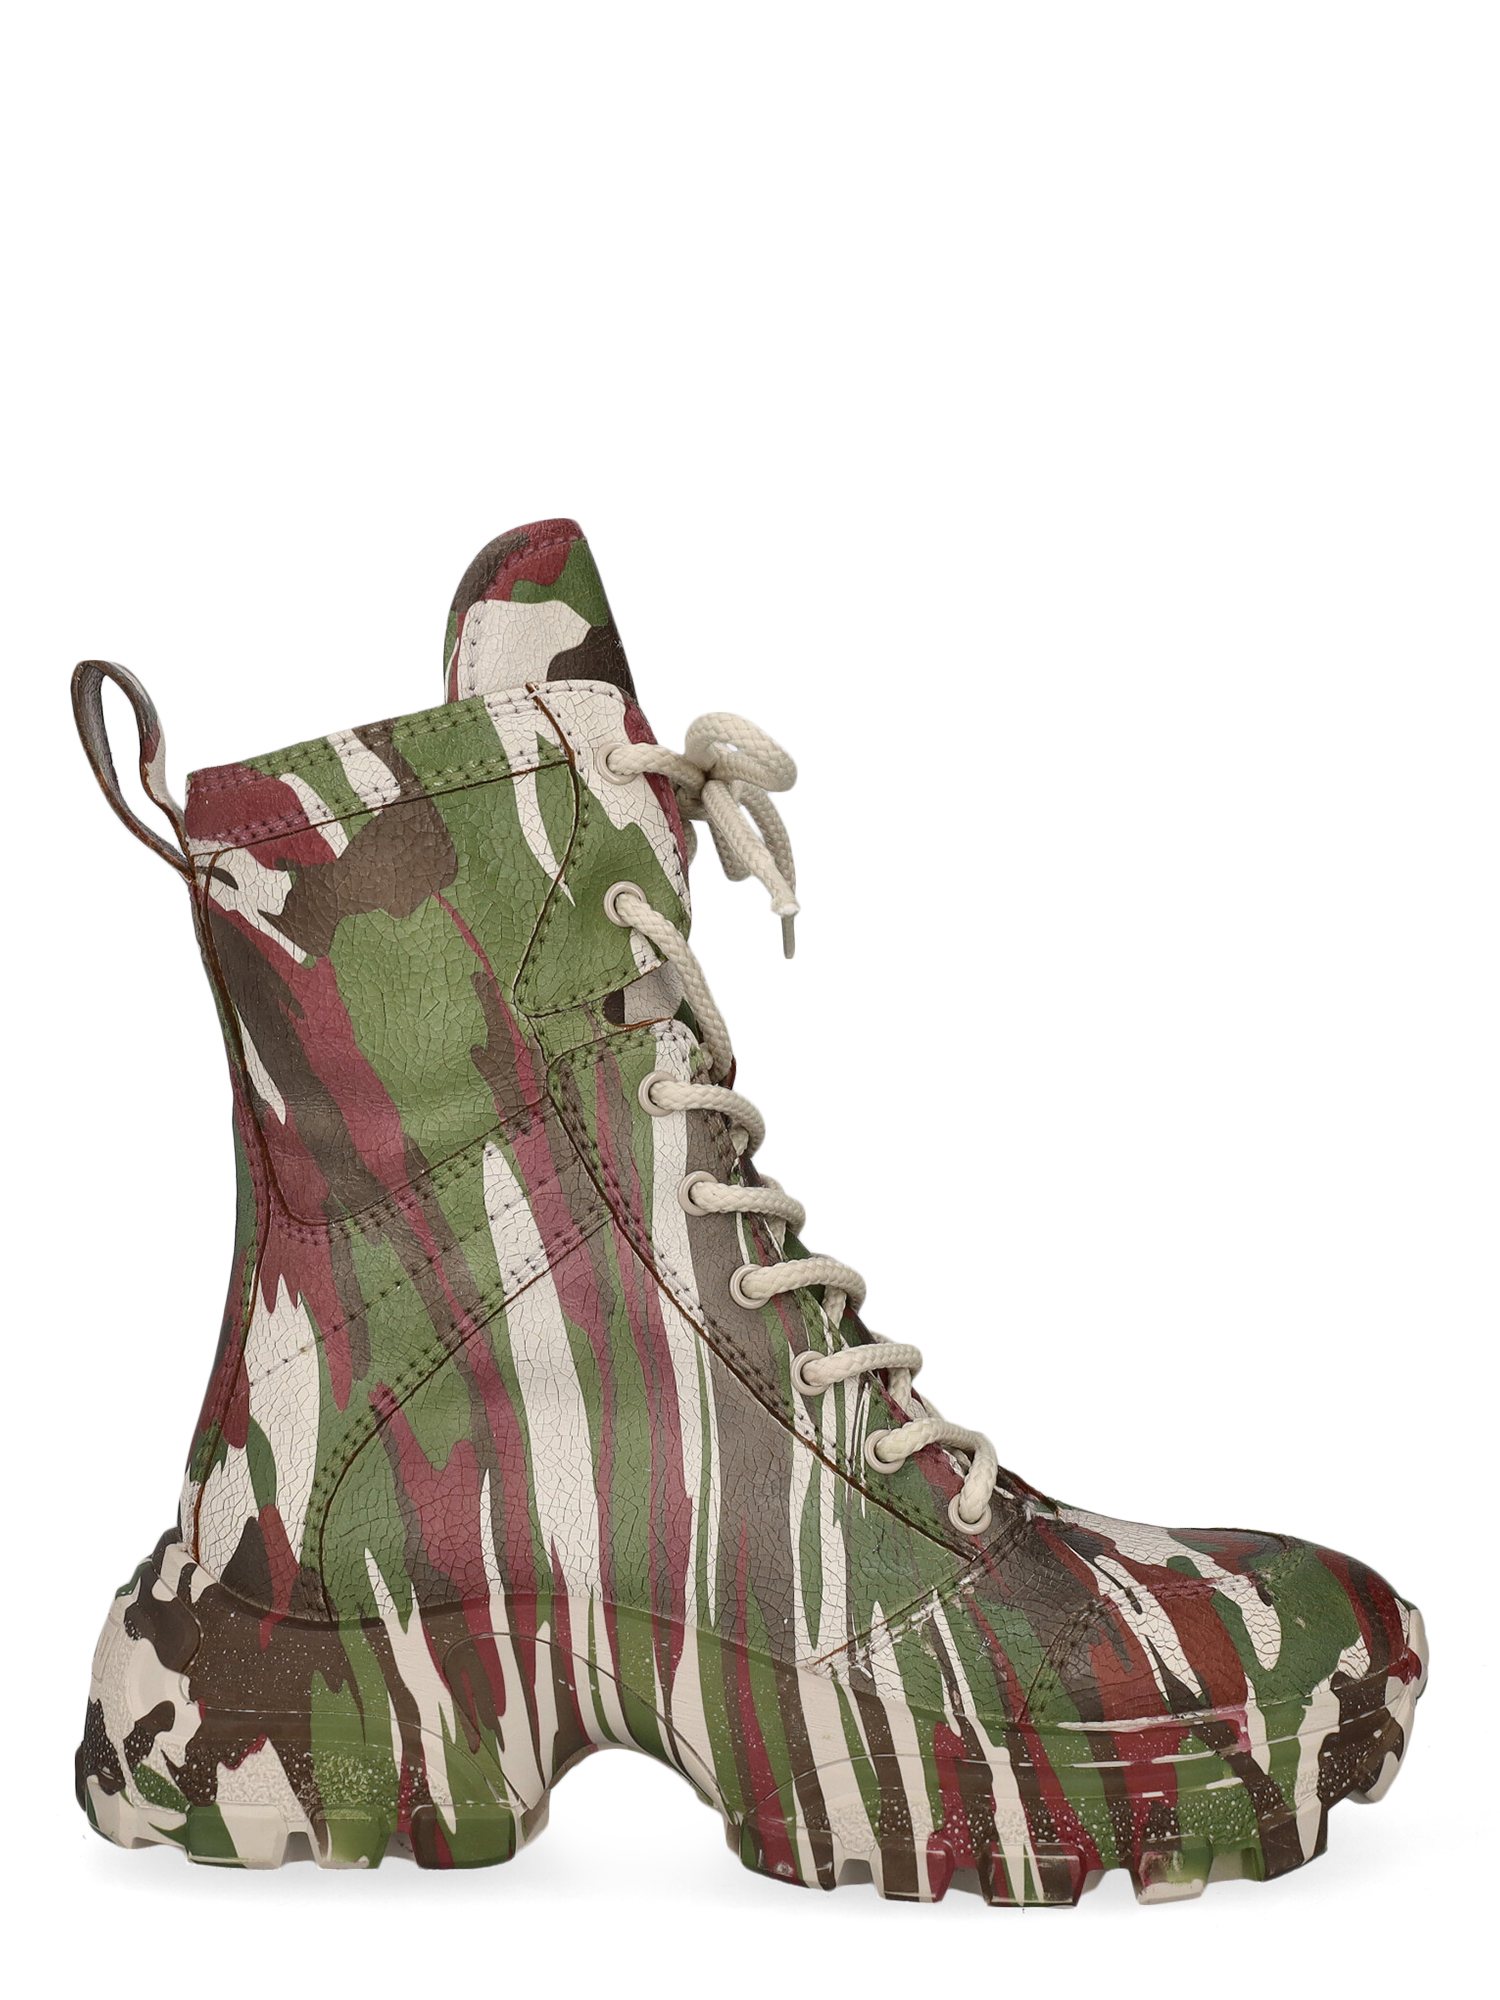 Condition: Excellent, Camouflage Print Leather, Color: Beige, Burgundy, Green -  -  - IT 39